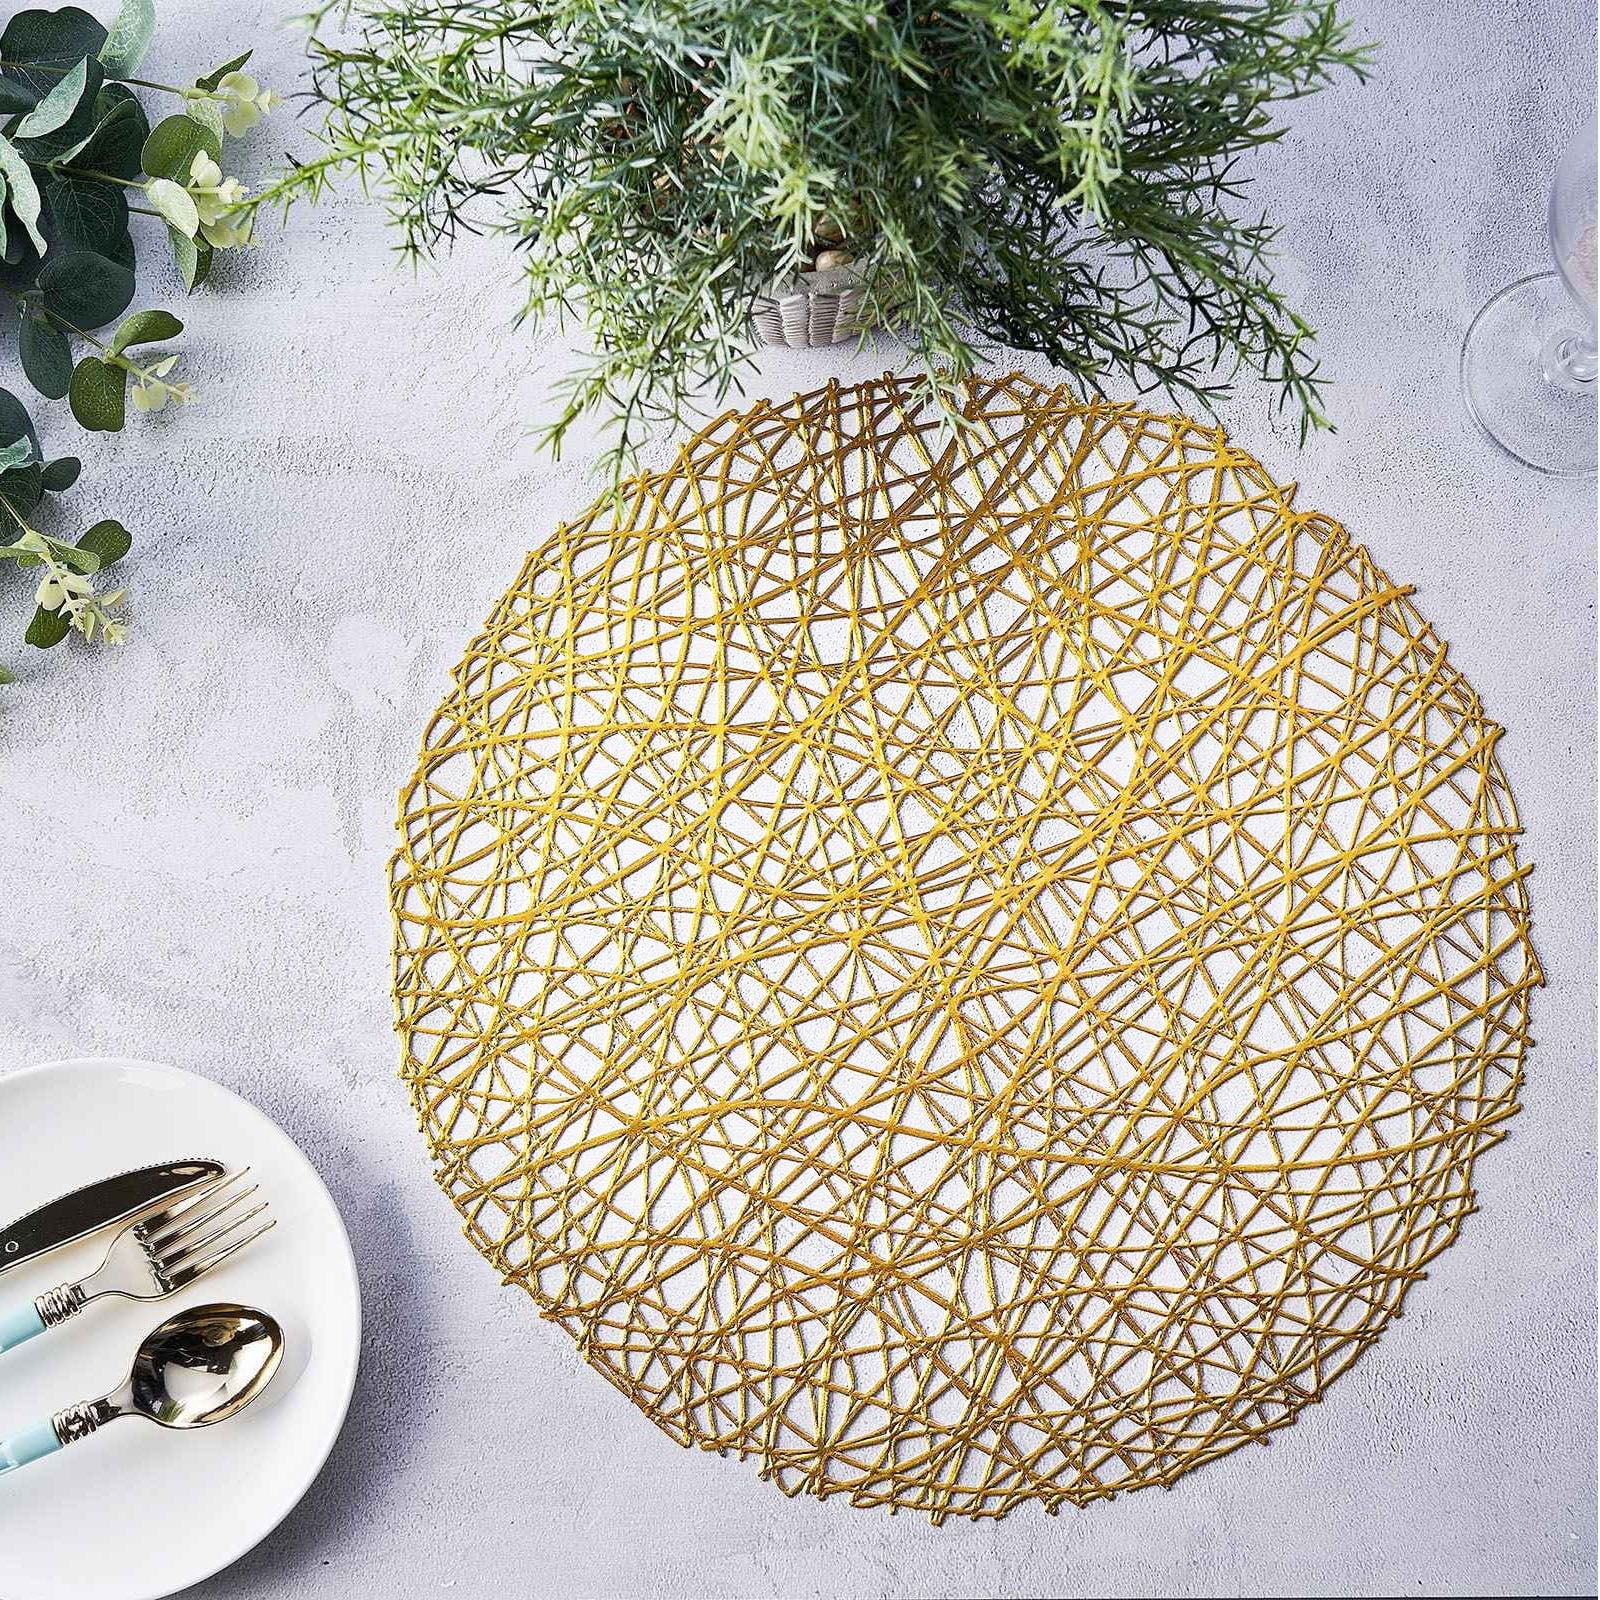 Dress Your Table Tableware Vintage Set of 4 Woven Rattan Teal Charger Plates Dining Placemats Table Design Place Setting